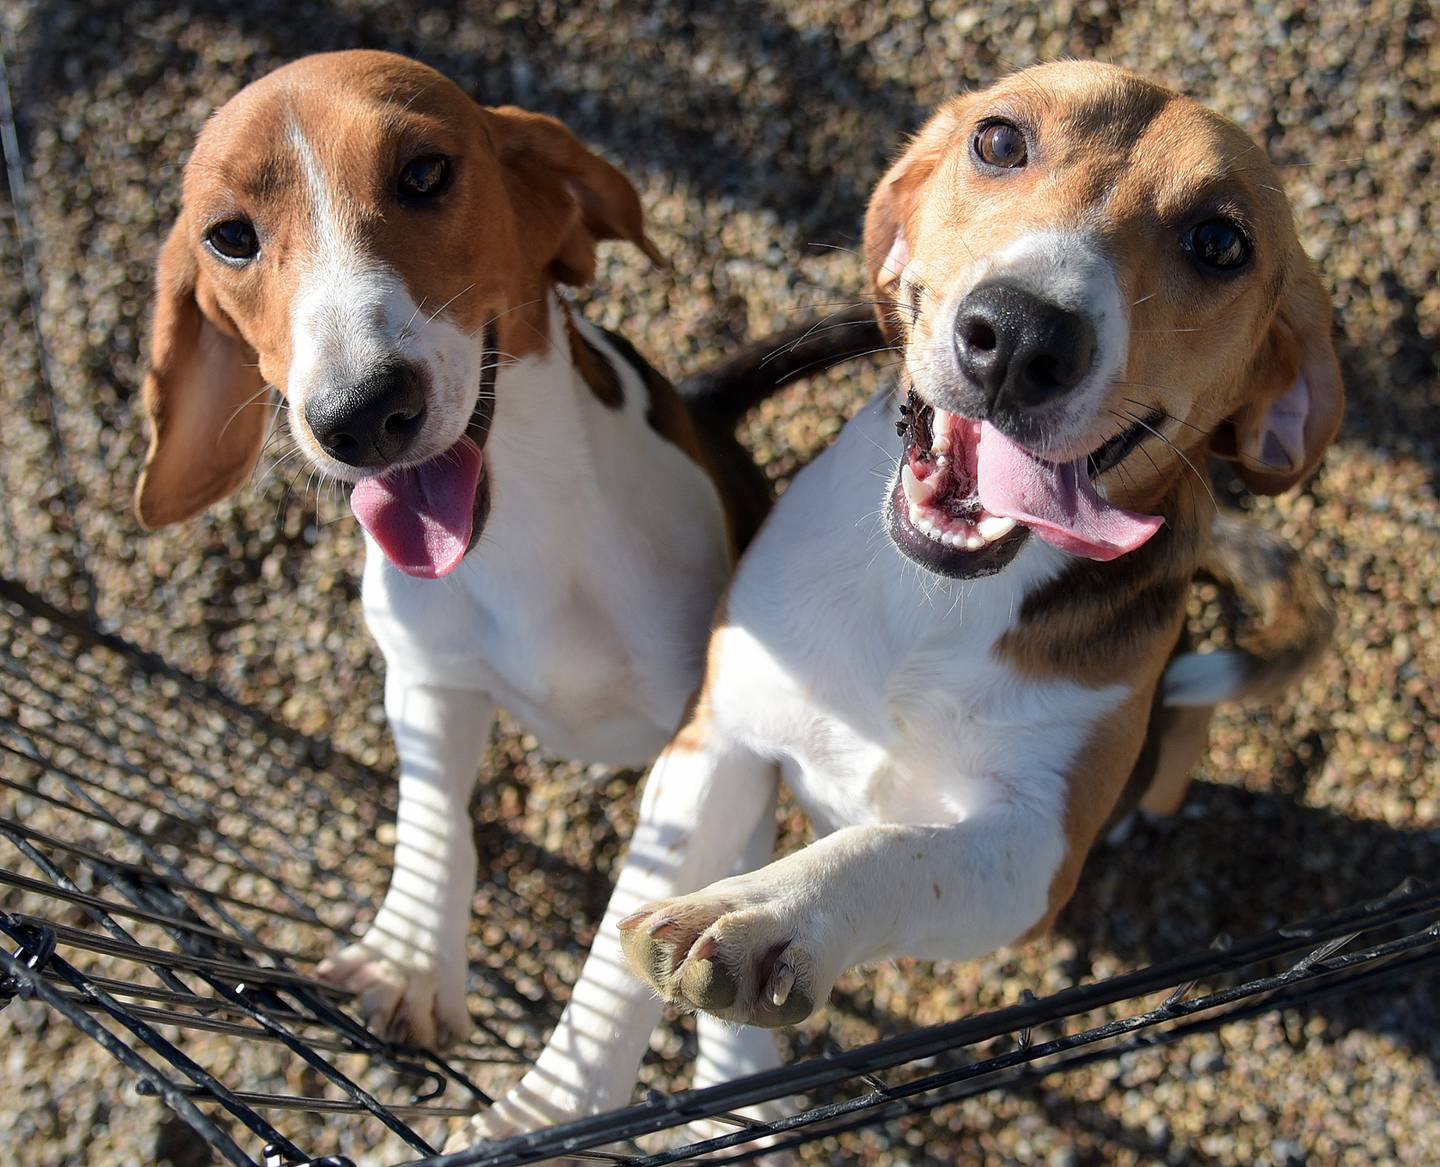 A couple of beagles vie for attention from volunteers, and a photographer, at Anderson Humane Tuesday morning. 91 beagles rescued by Anderson Humane from a breeding facility in Virginia were handed over to their foster families Tuesday.